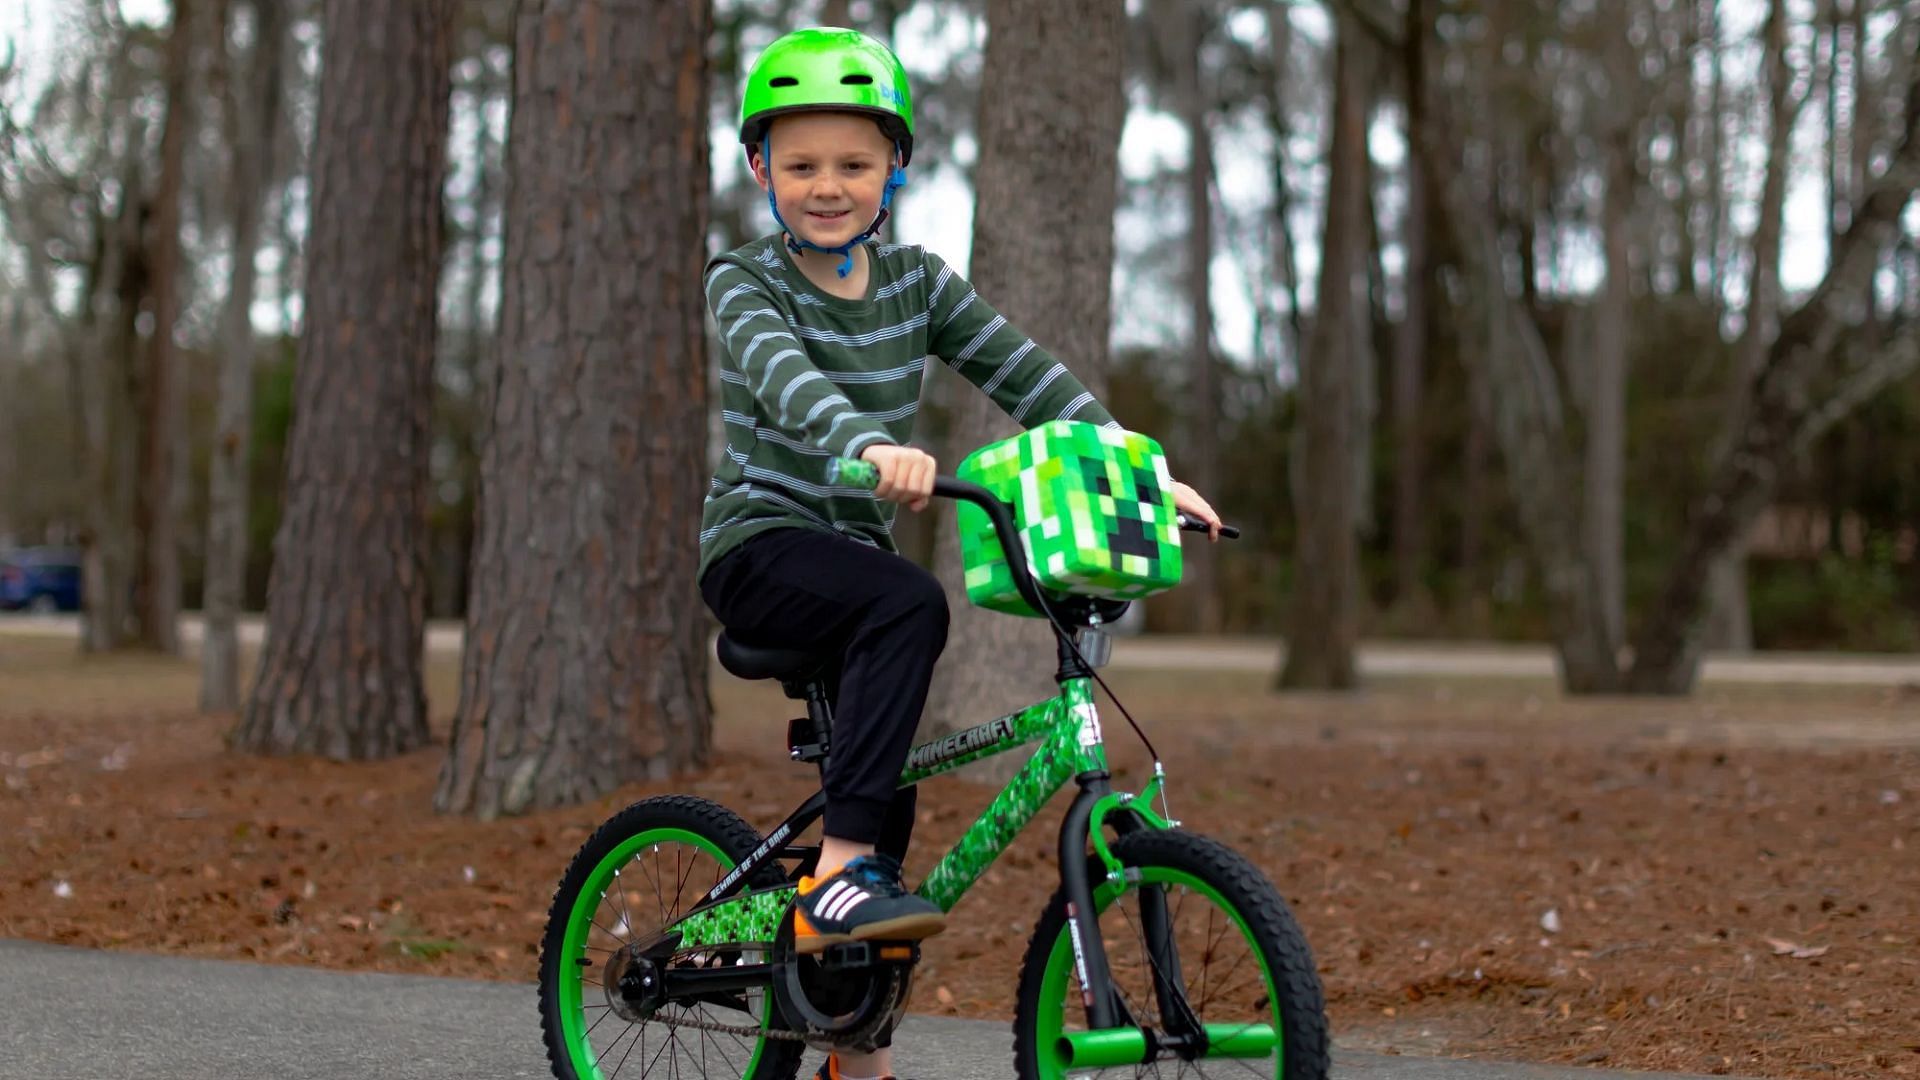 How to get the Minecraft creeper-themed bicycle